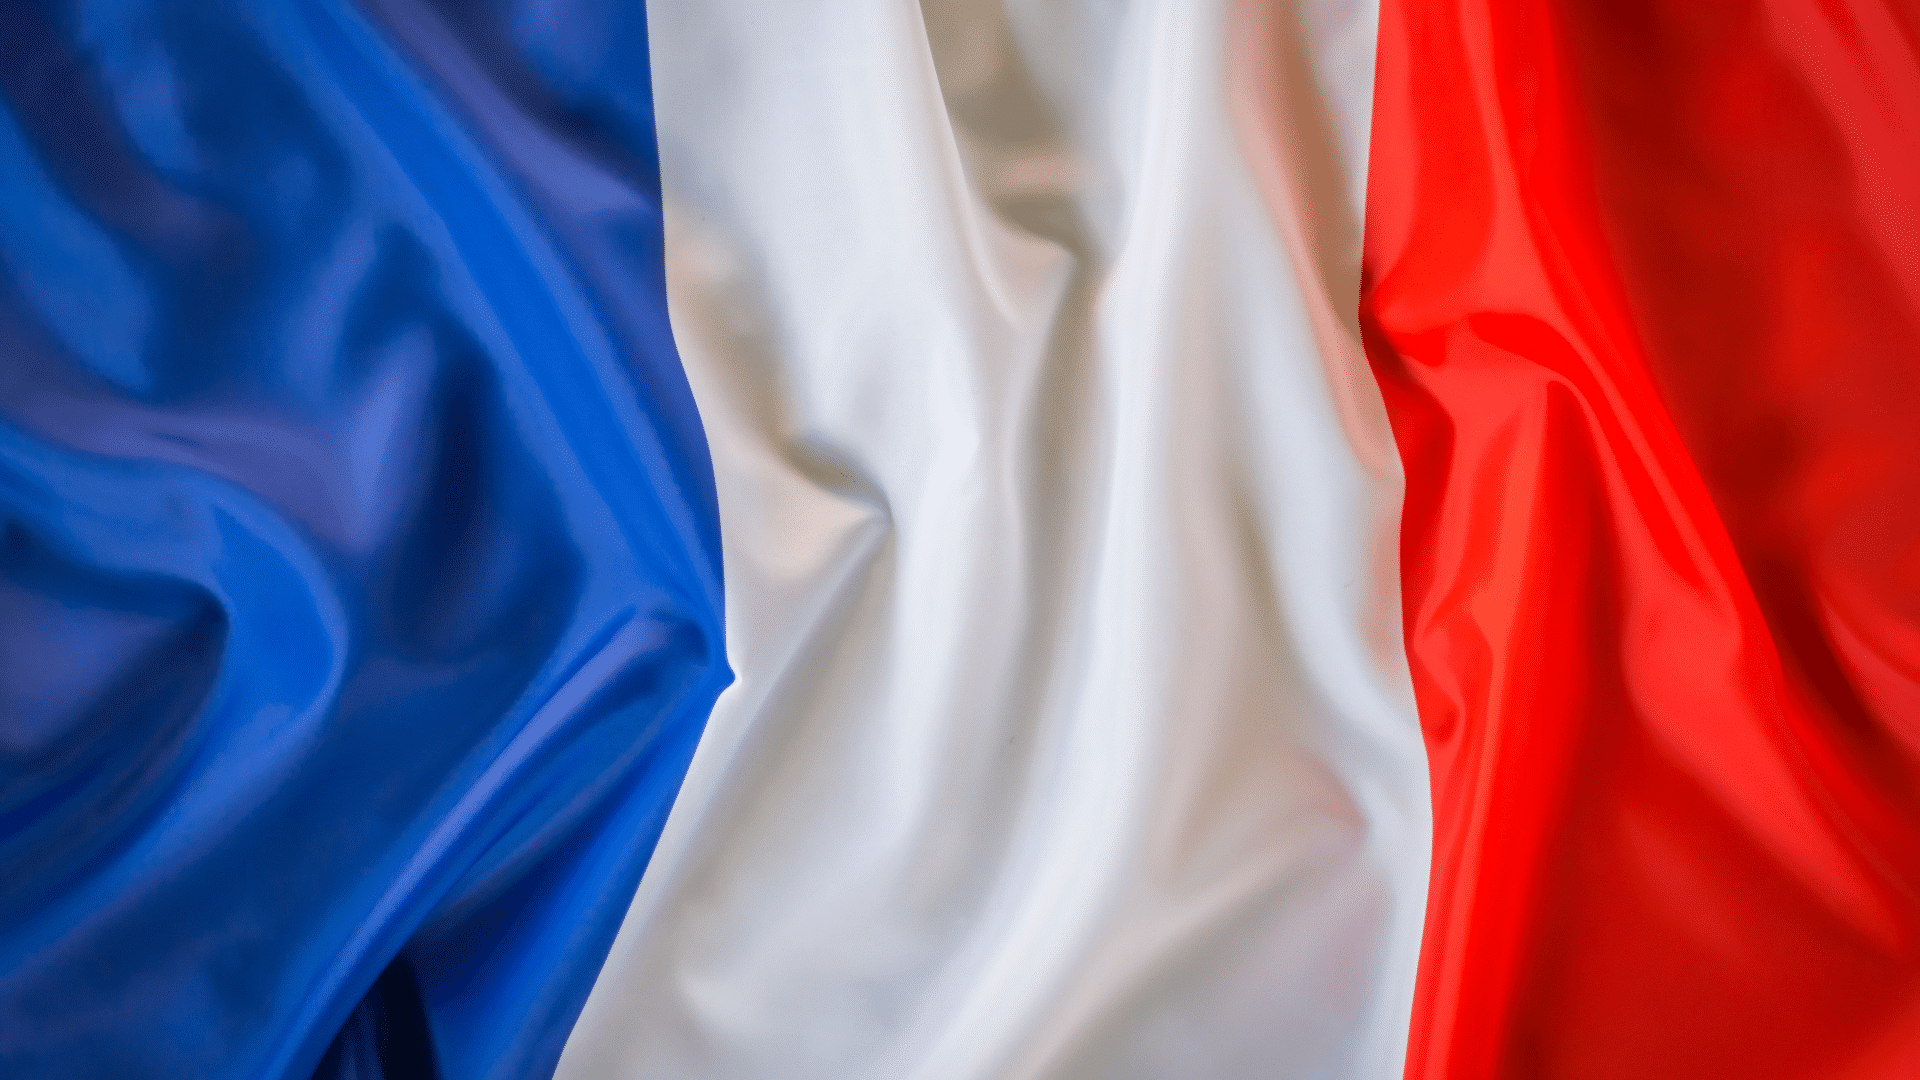 Will France legalize cannabis by 2030?